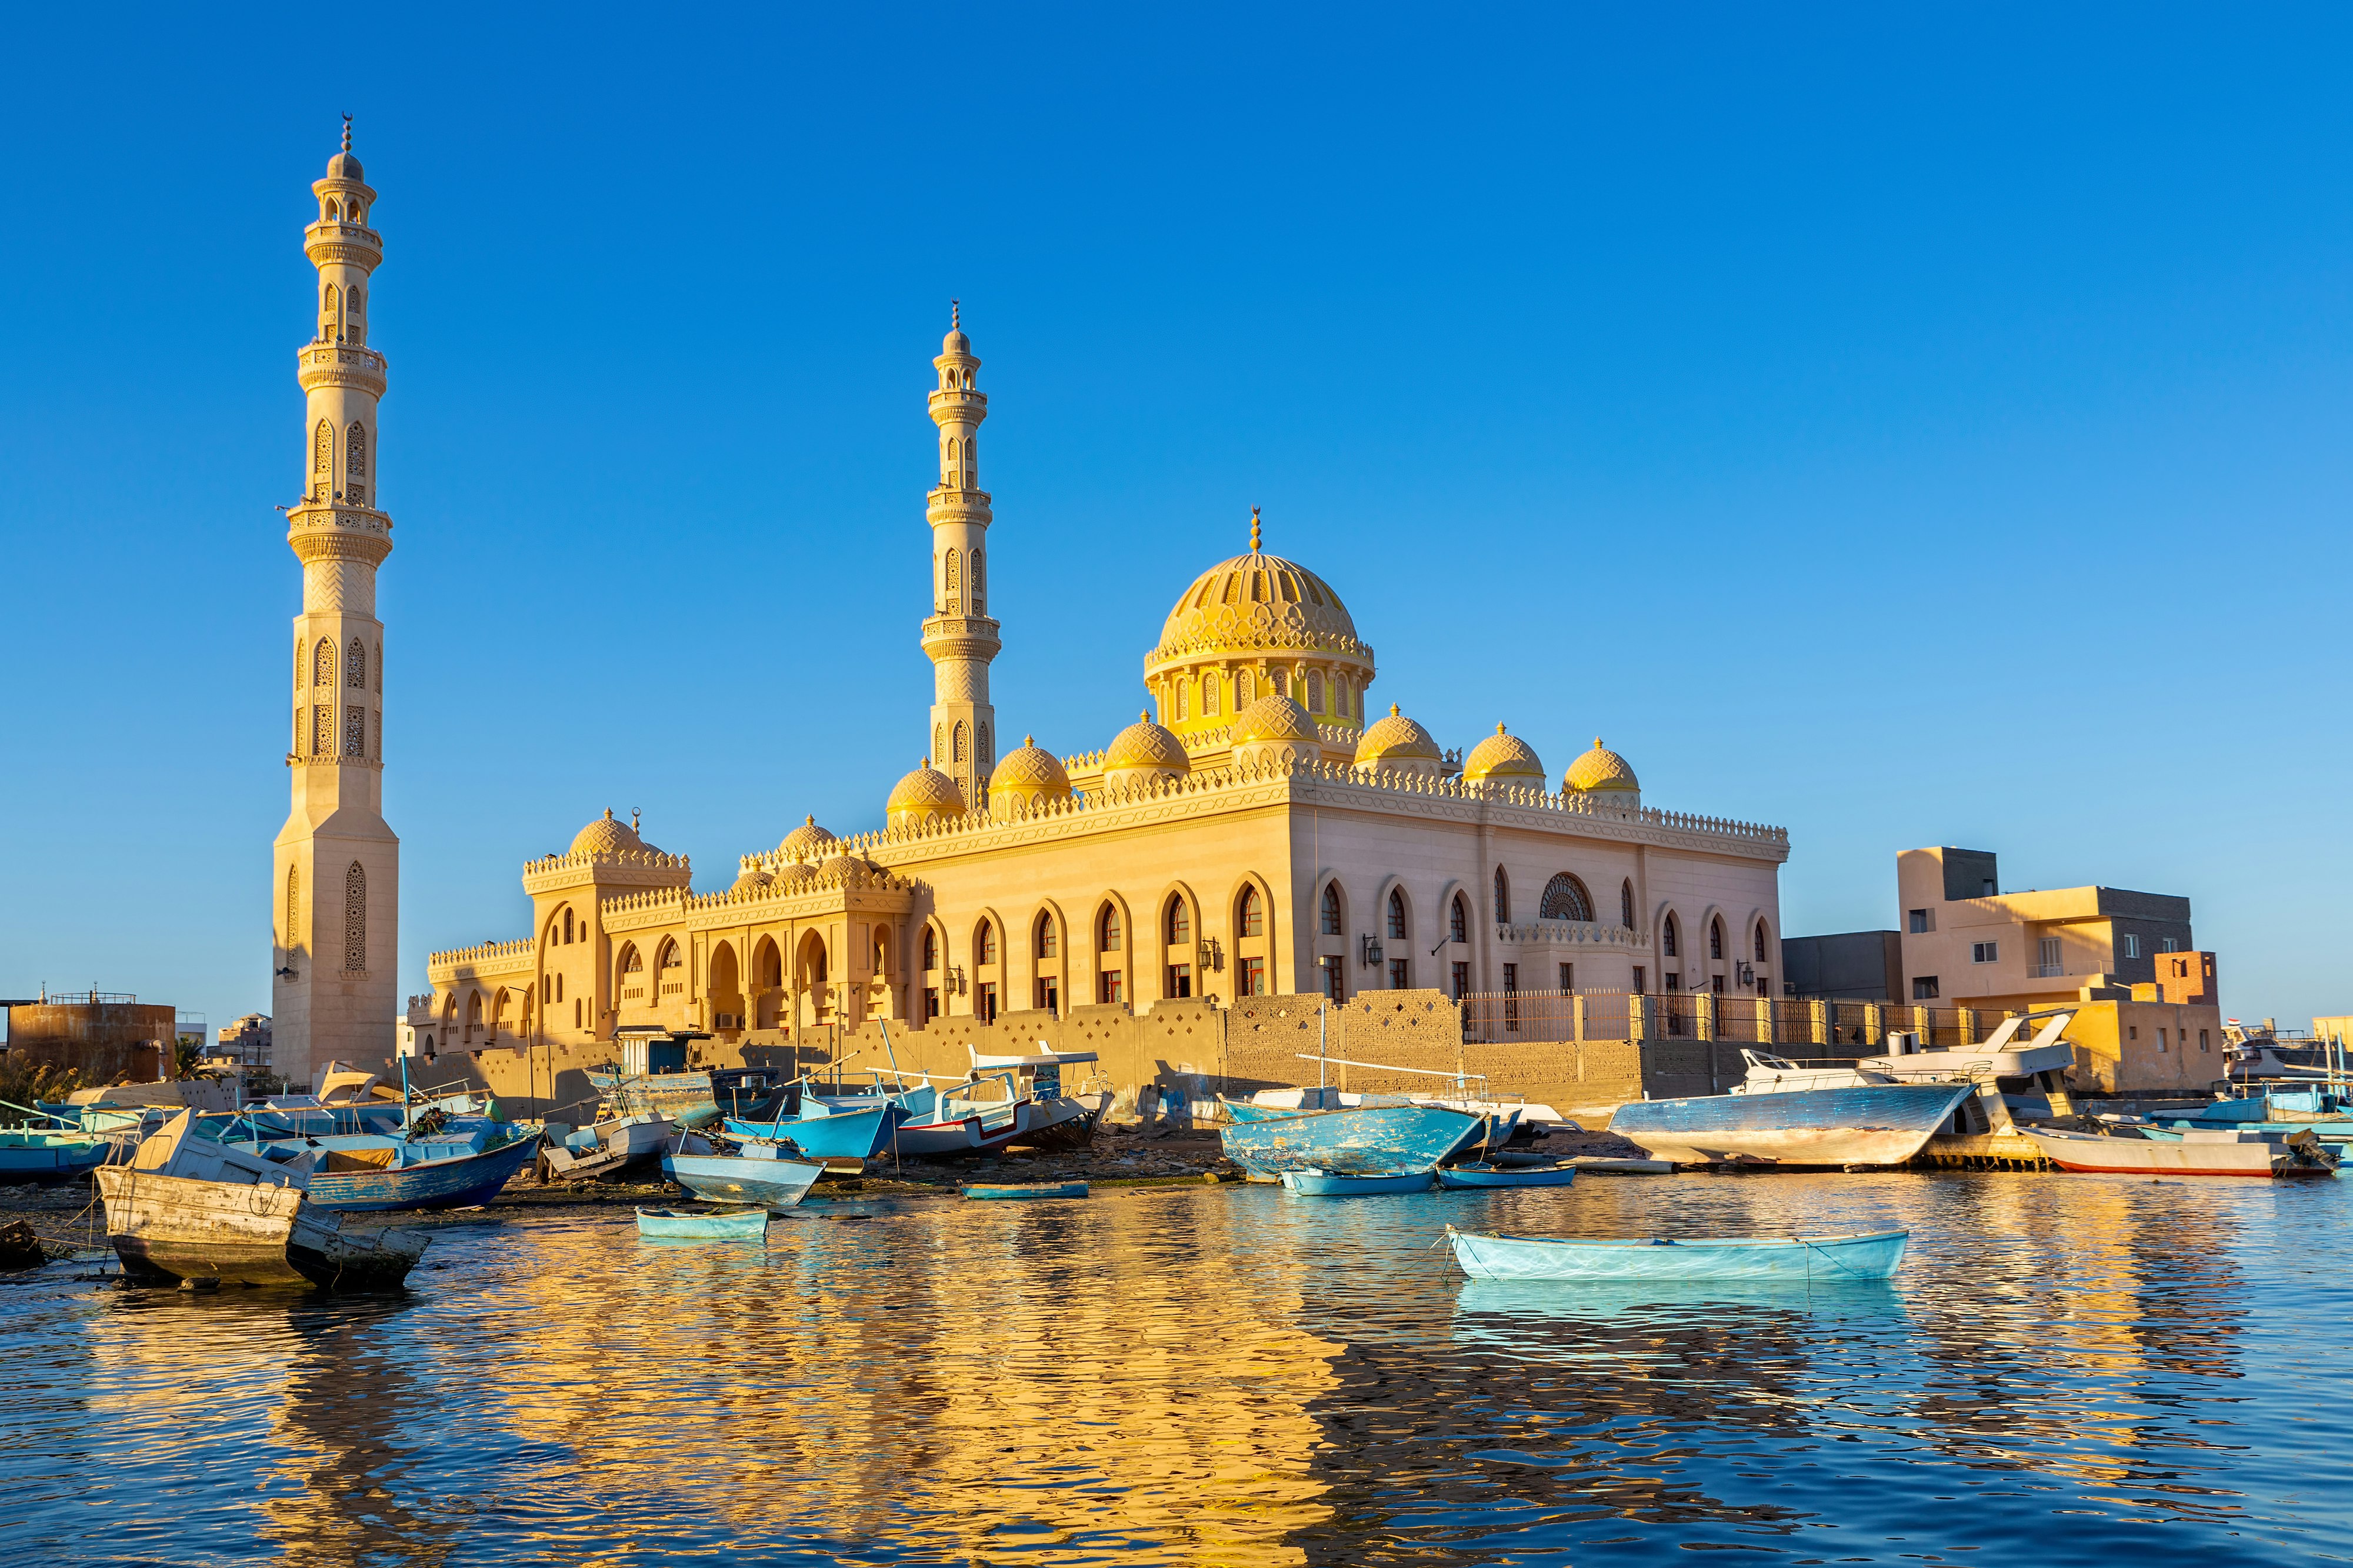 Exterior shot of a mosque. There are a collection of fishing boats moored in the water in front of the mosque.